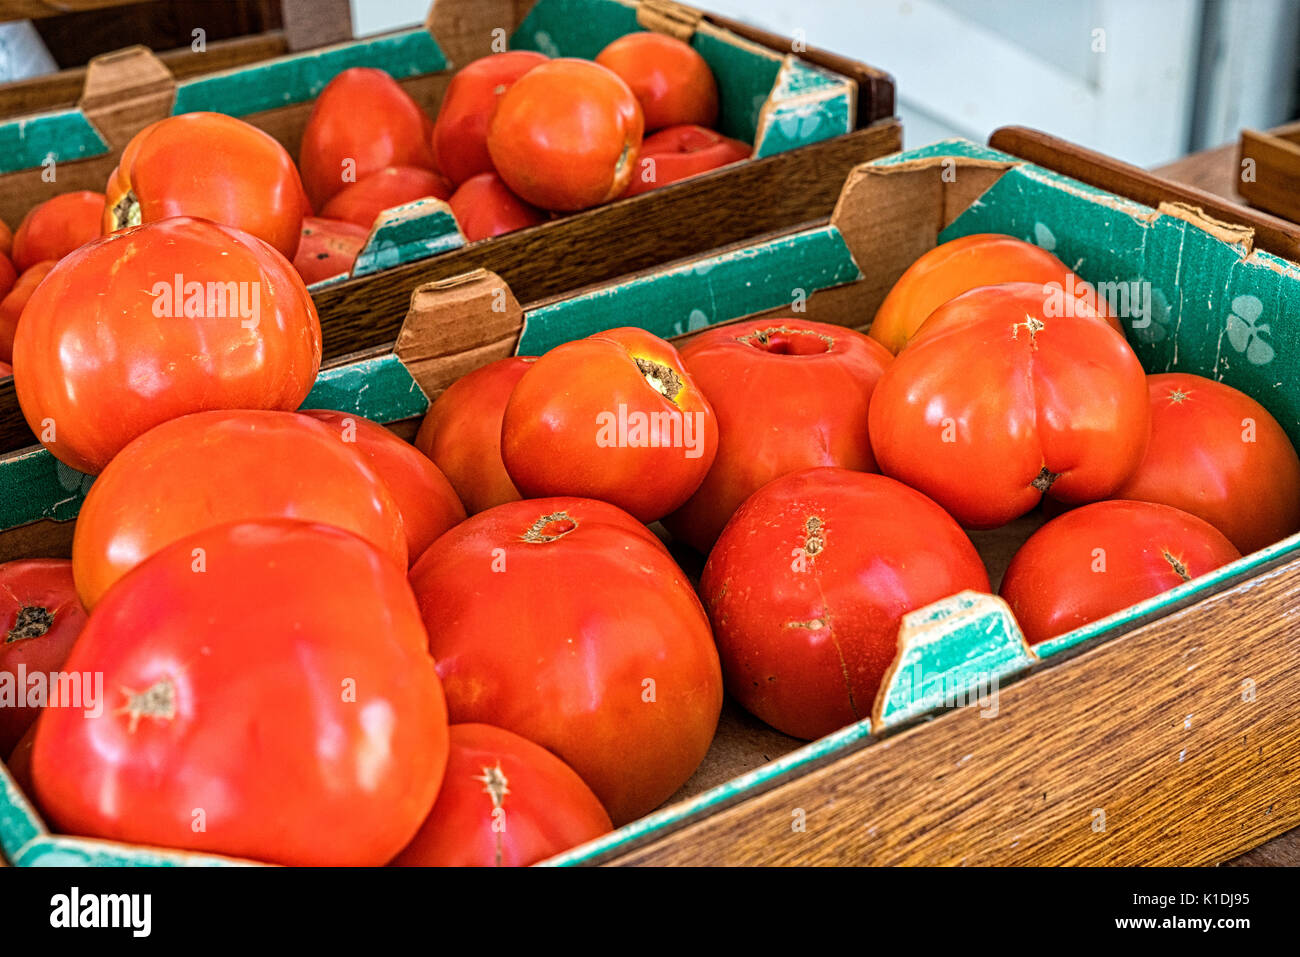 New Jersey, Cranbury.  Red Ripe New Jersey Beefsteak Tomatores, Displayed in Cardboard Cartons and Offered For Sale in a Roadside Farmstand. Stock Photo